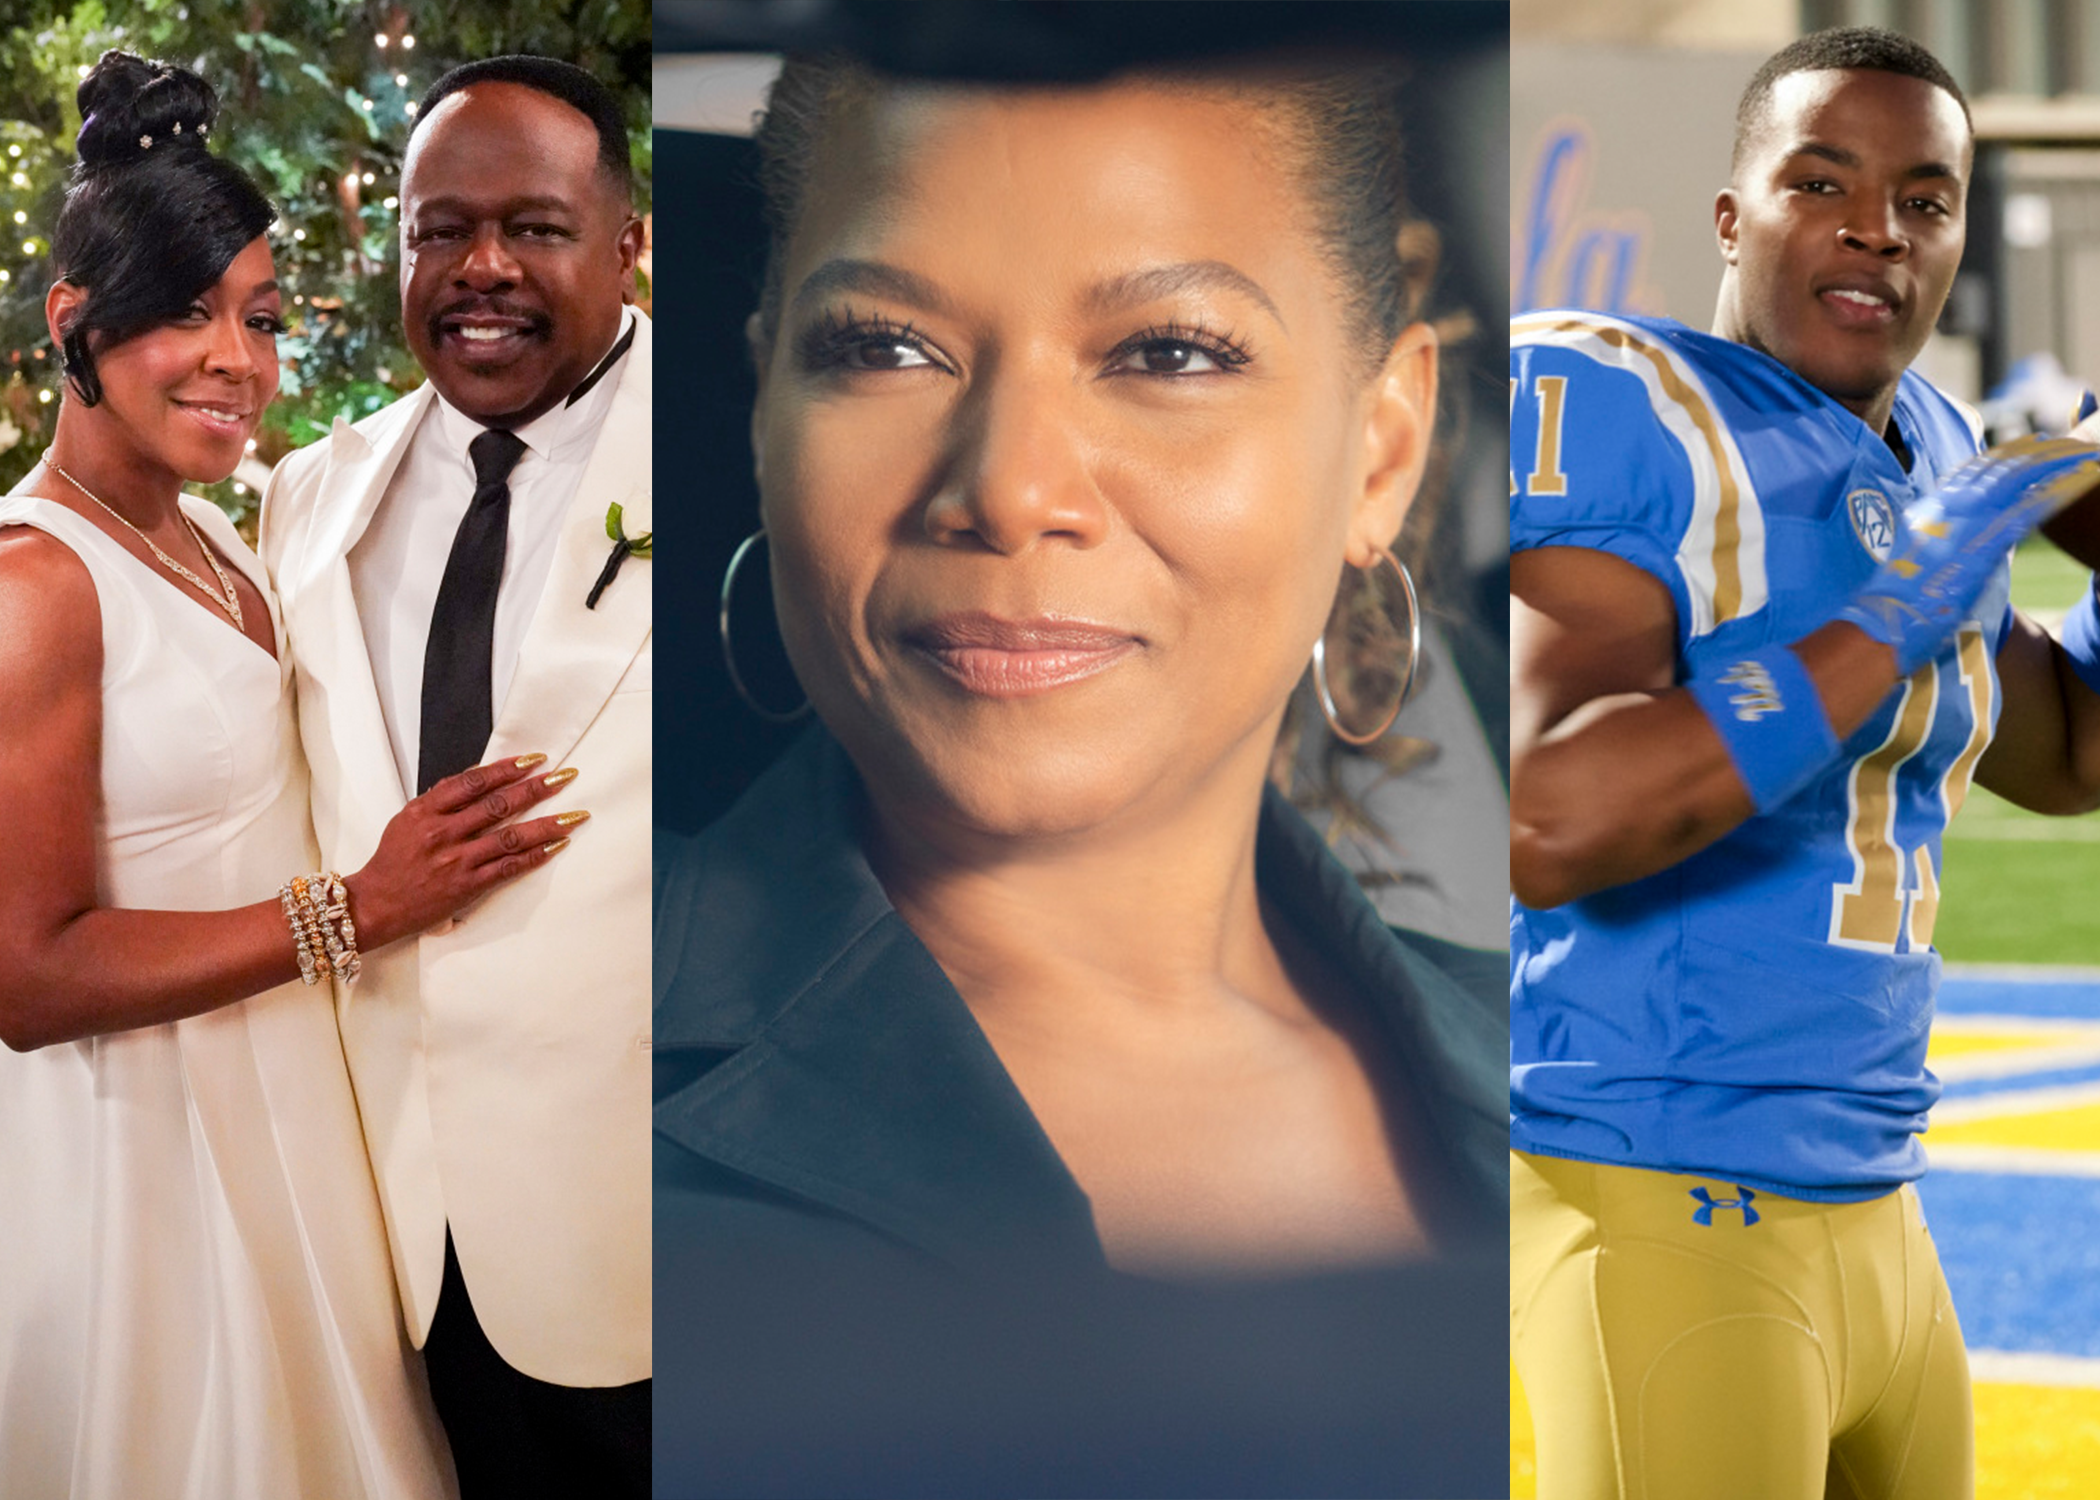 A triptych of Tichina Arnold and Cedric the Entertainer, Queen Latifah, and Daniel Ezra